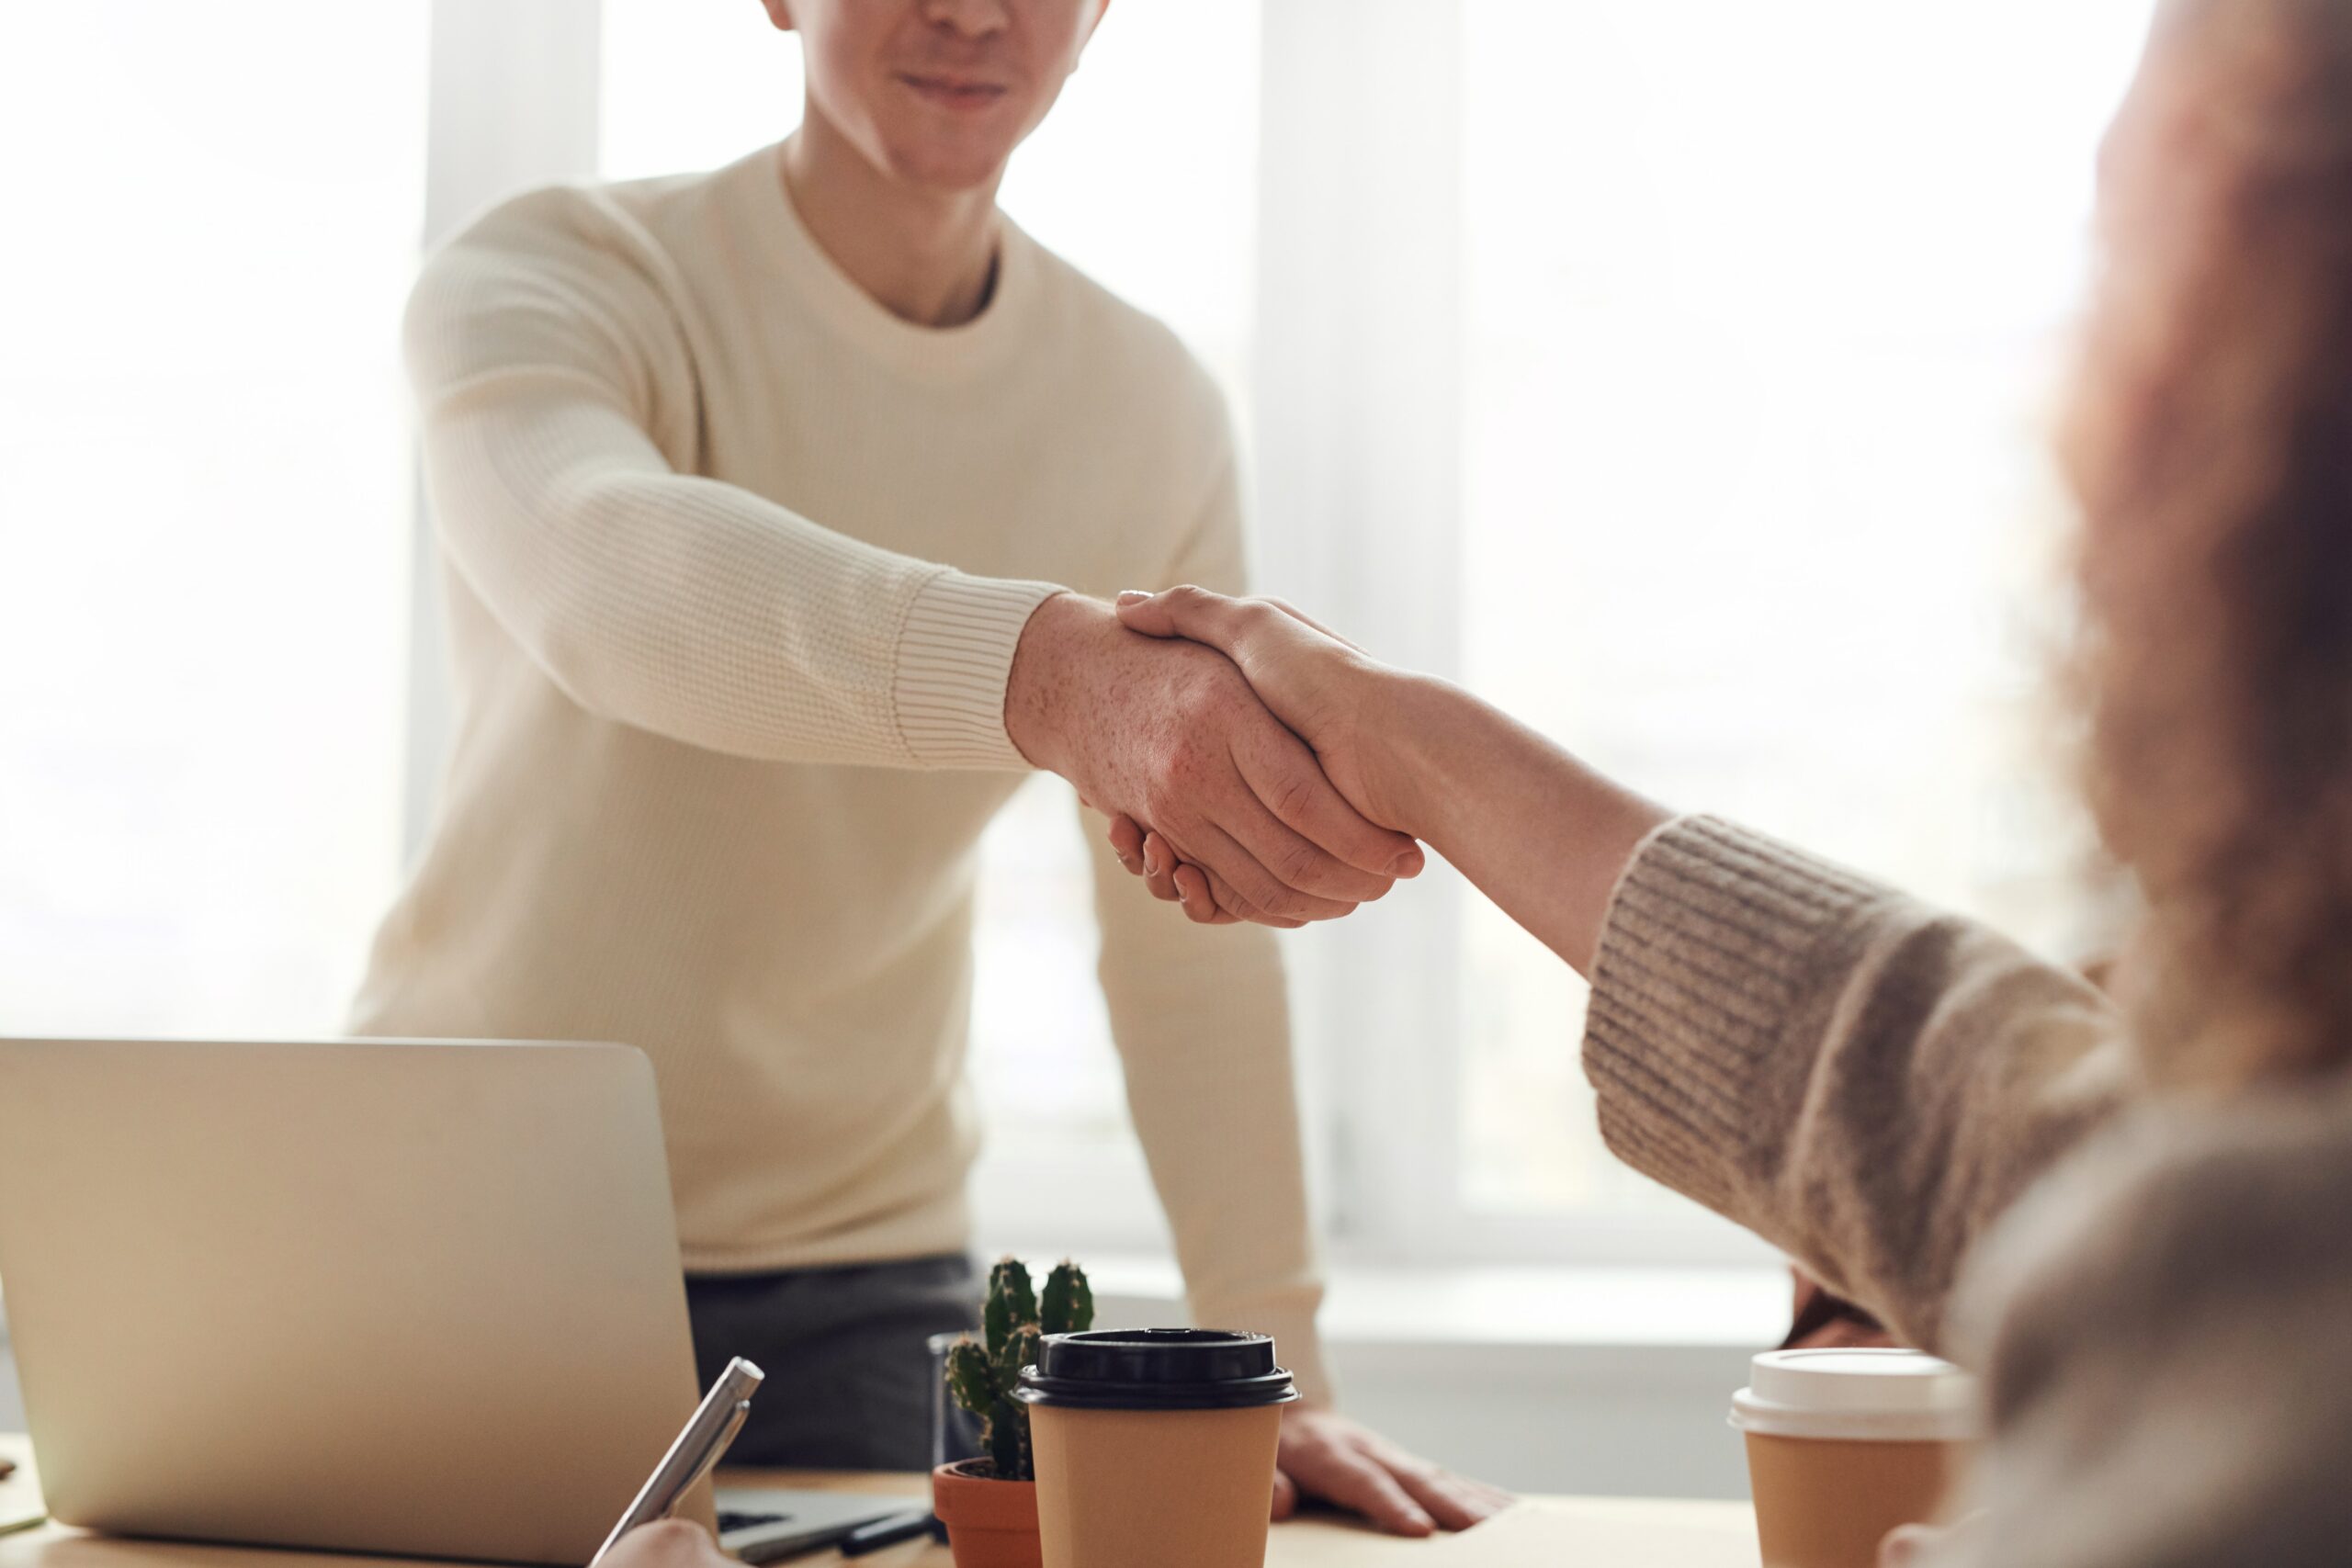 Two people shaking hands, demonstrating integrity